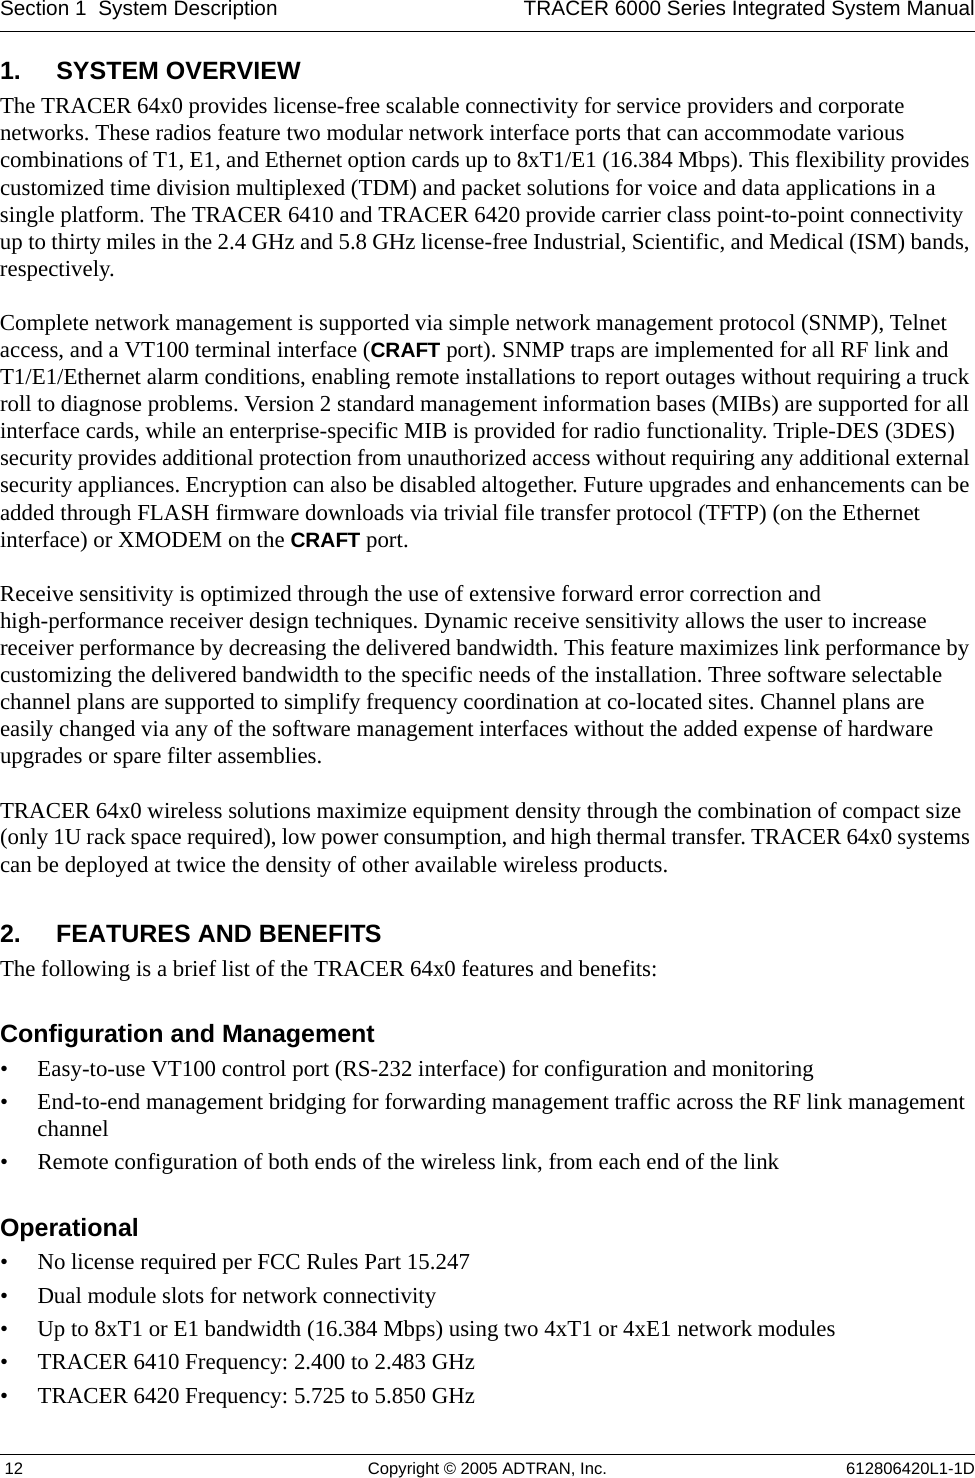 Section 1  System Description TRACER 6000 Series Integrated System Manual 12 Copyright © 2005 ADTRAN, Inc. 612806420L1-1D1. SYSTEM OVERVIEWThe TRACER 64x0 provides license-free scalable connectivity for service providers and corporate networks. These radios feature two modular network interface ports that can accommodate various combinations of T1, E1, and Ethernet option cards up to 8xT1/E1 (16.384 Mbps). This flexibility provides customized time division multiplexed (TDM) and packet solutions for voice and data applications in a single platform. The TRACER 6410 and TRACER 6420 provide carrier class point-to-point connectivity up to thirty miles in the 2.4 GHz and 5.8 GHz license-free Industrial, Scientific, and Medical (ISM) bands, respectively.Complete network management is supported via simple network management protocol (SNMP), Telnet access, and a VT100 terminal interface (CRAFT port). SNMP traps are implemented for all RF link and T1/E1/Ethernet alarm conditions, enabling remote installations to report outages without requiring a truck roll to diagnose problems. Version 2 standard management information bases (MIBs) are supported for all interface cards, while an enterprise-specific MIB is provided for radio functionality. Triple-DES (3DES) security provides additional protection from unauthorized access without requiring any additional external security appliances. Encryption can also be disabled altogether. Future upgrades and enhancements can be added through FLASH firmware downloads via trivial file transfer protocol (TFTP) (on the Ethernet interface) or XMODEM on the CRAFT port.Receive sensitivity is optimized through the use of extensive forward error correction and high-performance receiver design techniques. Dynamic receive sensitivity allows the user to increase receiver performance by decreasing the delivered bandwidth. This feature maximizes link performance by customizing the delivered bandwidth to the specific needs of the installation. Three software selectable channel plans are supported to simplify frequency coordination at co-located sites. Channel plans are easily changed via any of the software management interfaces without the added expense of hardware upgrades or spare filter assemblies.TRACER 64x0 wireless solutions maximize equipment density through the combination of compact size (only 1U rack space required), low power consumption, and high thermal transfer. TRACER 64x0 systems can be deployed at twice the density of other available wireless products.2. FEATURES AND BENEFITSThe following is a brief list of the TRACER 64x0 features and benefits:Configuration and Management• Easy-to-use VT100 control port (RS-232 interface) for configuration and monitoring• End-to-end management bridging for forwarding management traffic across the RF link management channel• Remote configuration of both ends of the wireless link, from each end of the linkOperational• No license required per FCC Rules Part 15.247• Dual module slots for network connectivity• Up to 8xT1 or E1 bandwidth (16.384 Mbps) using two 4xT1 or 4xE1 network modules• TRACER 6410 Frequency: 2.400 to 2.483 GHz• TRACER 6420 Frequency: 5.725 to 5.850 GHz